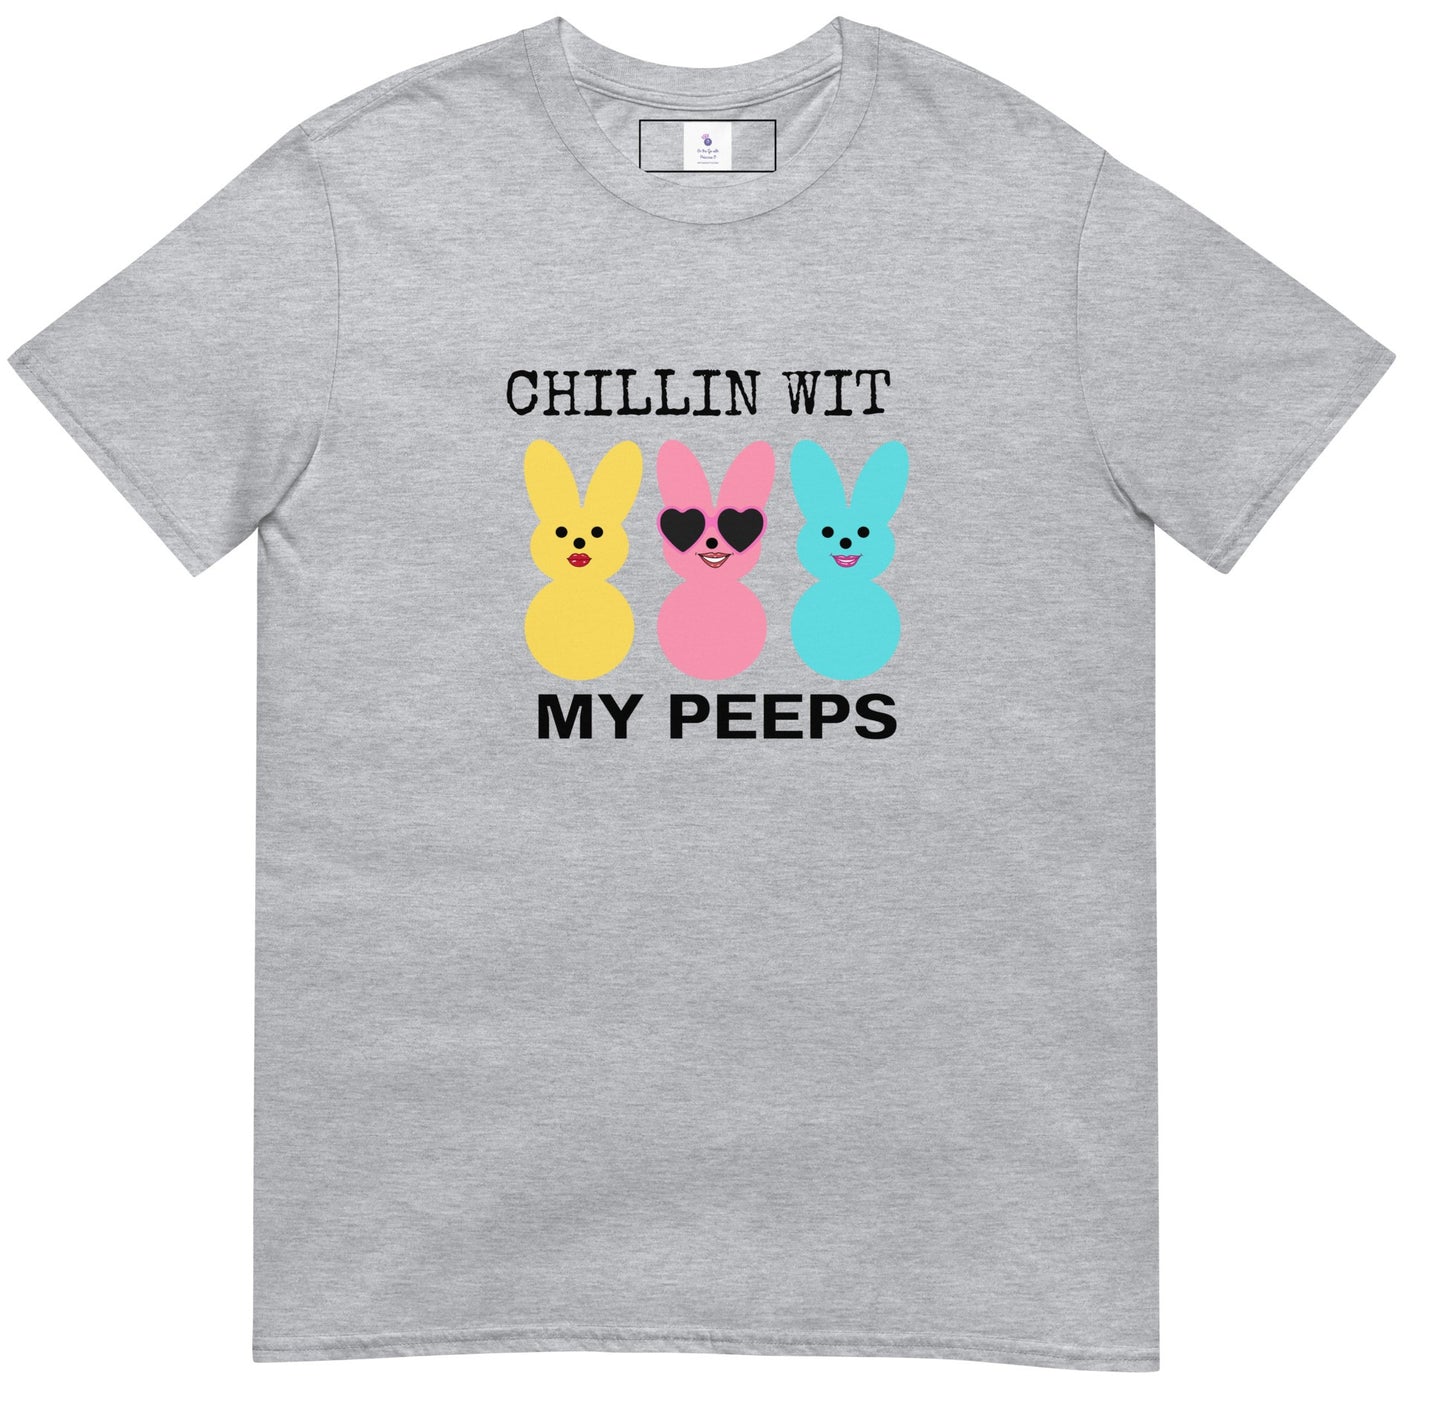 Chillin Wit My Peeps Womens Tee S-3XL - On the Go with Princess O